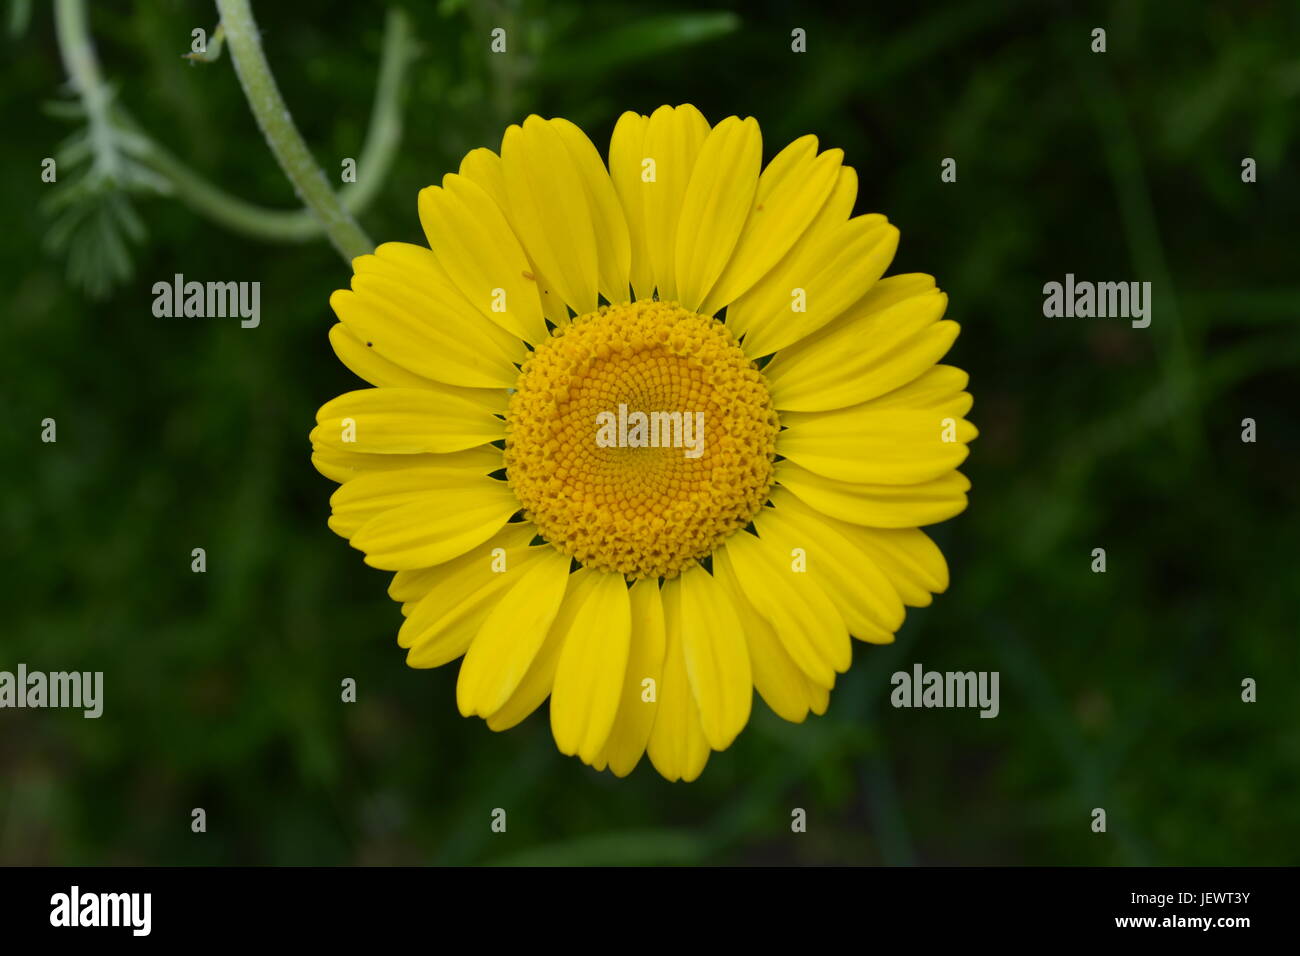 close up of single yellow flower daisy bloom petals representing purity innocence childhood and cleanliness with out of focus green background Stock Photo